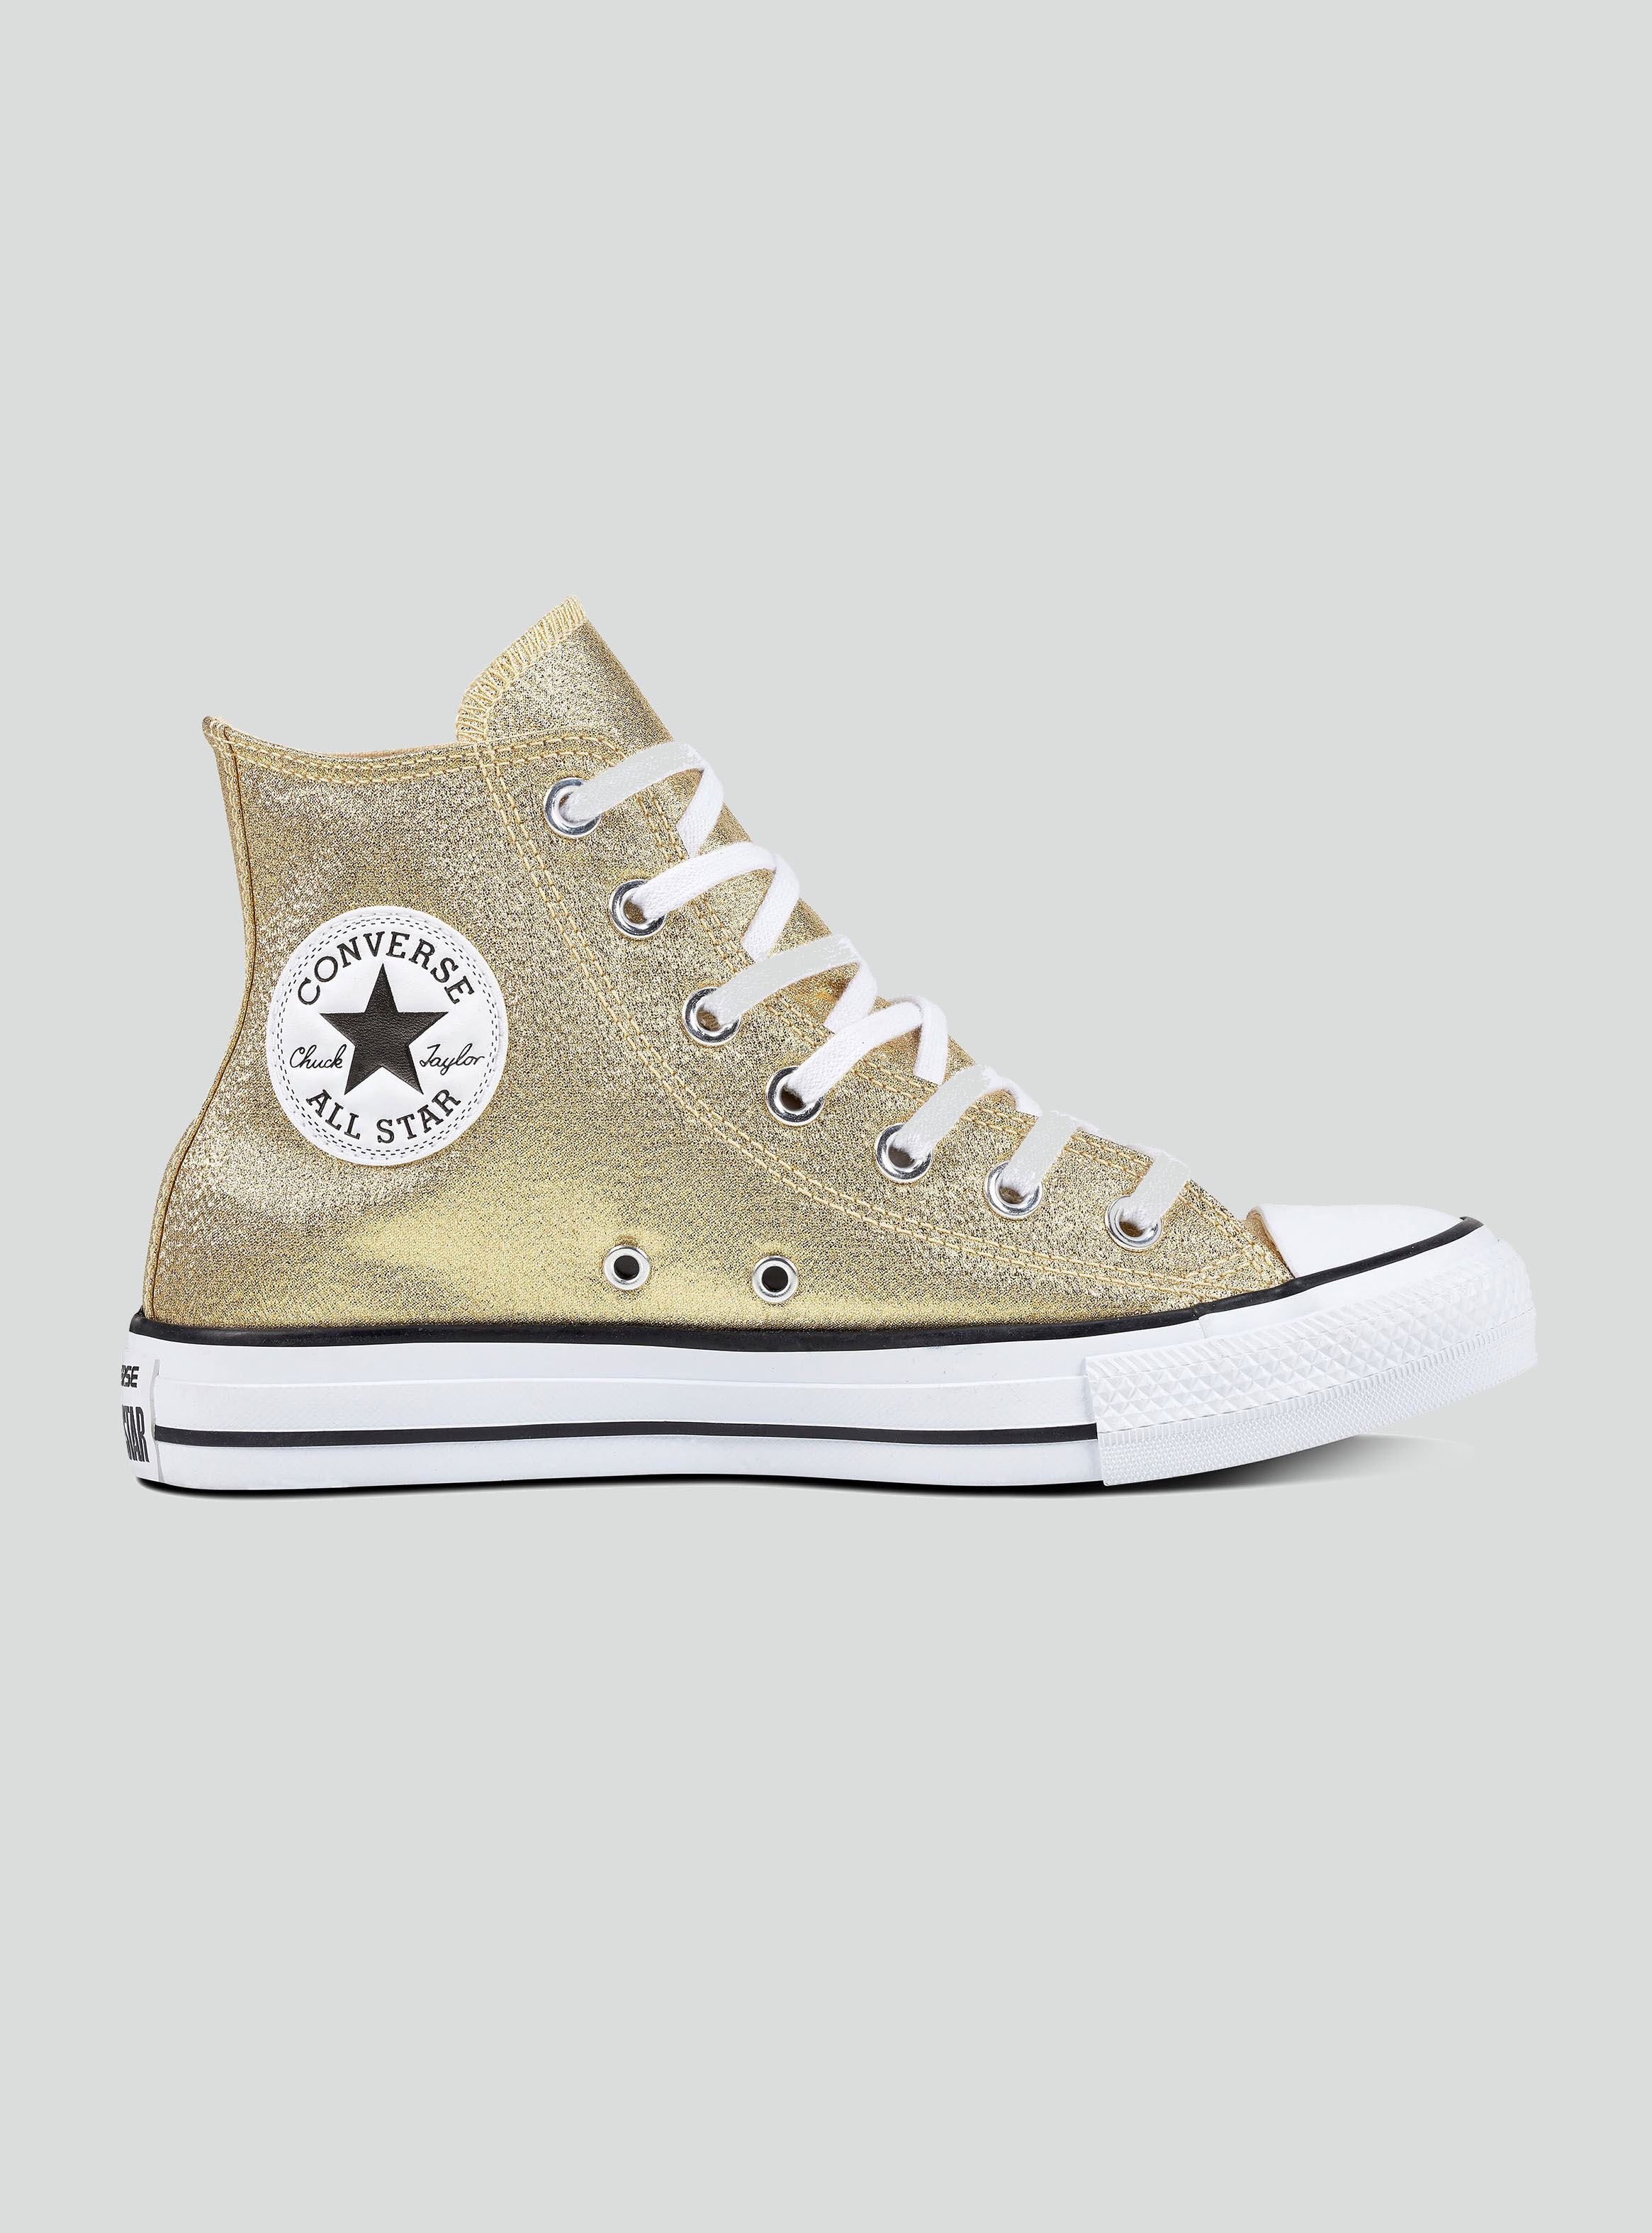 converse dorados mujer Limited Special and Special Offers - Quality Promotional Products Merchandise Lowest Prices